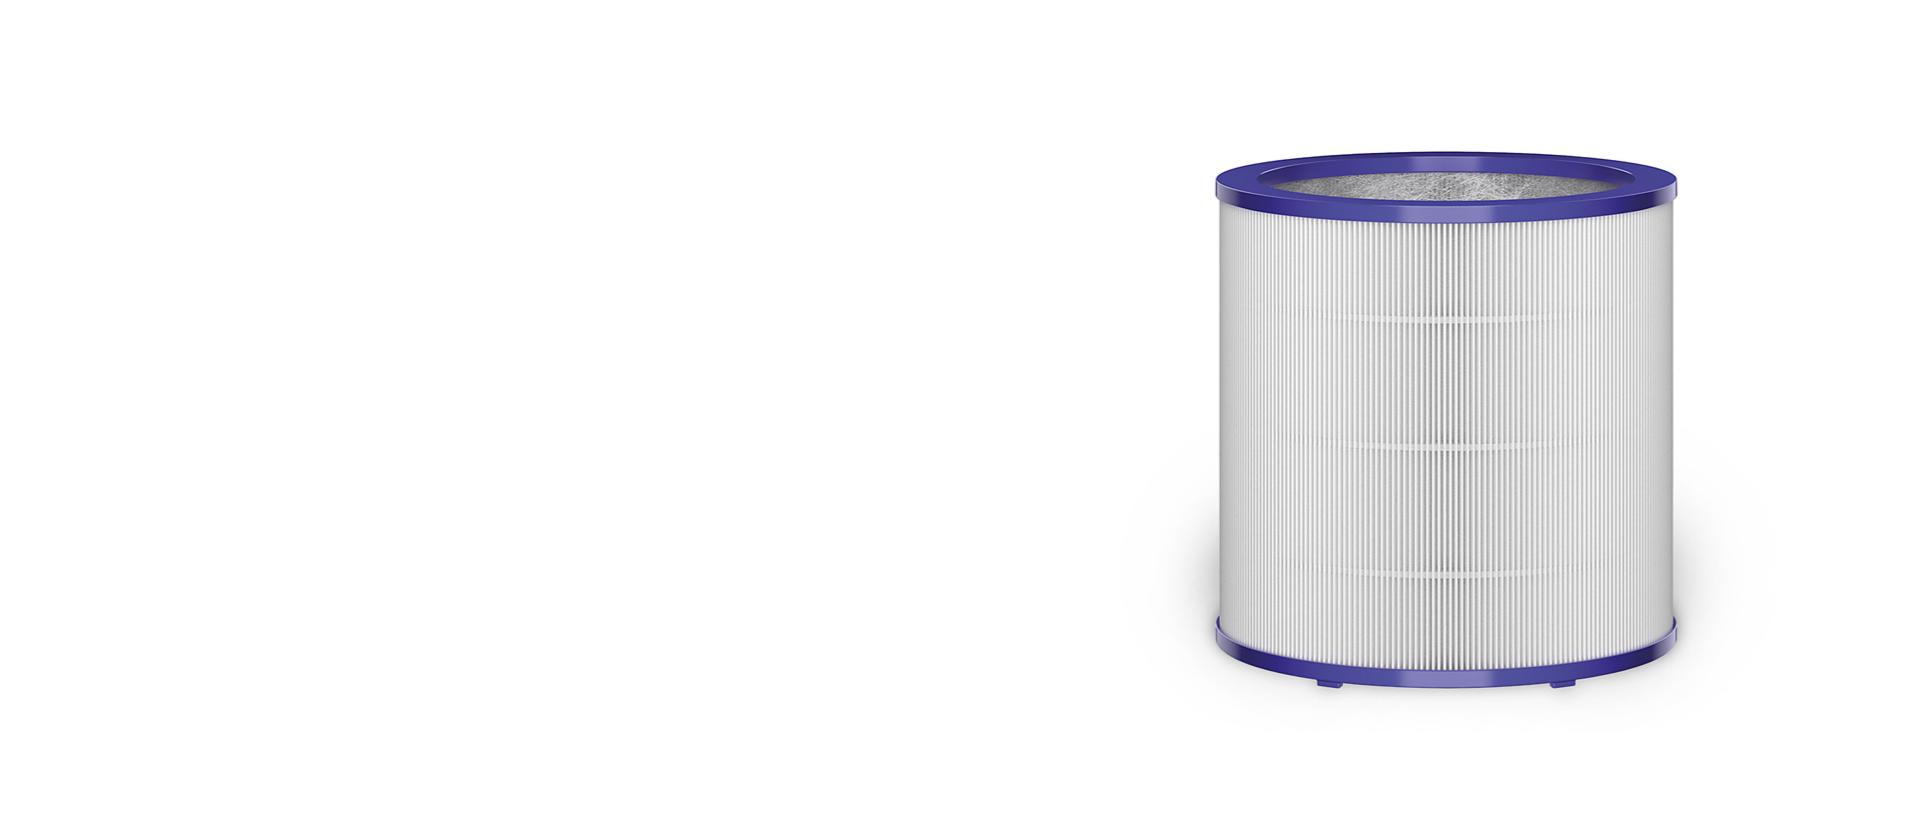 Dyson filter displayed for a vacuum.